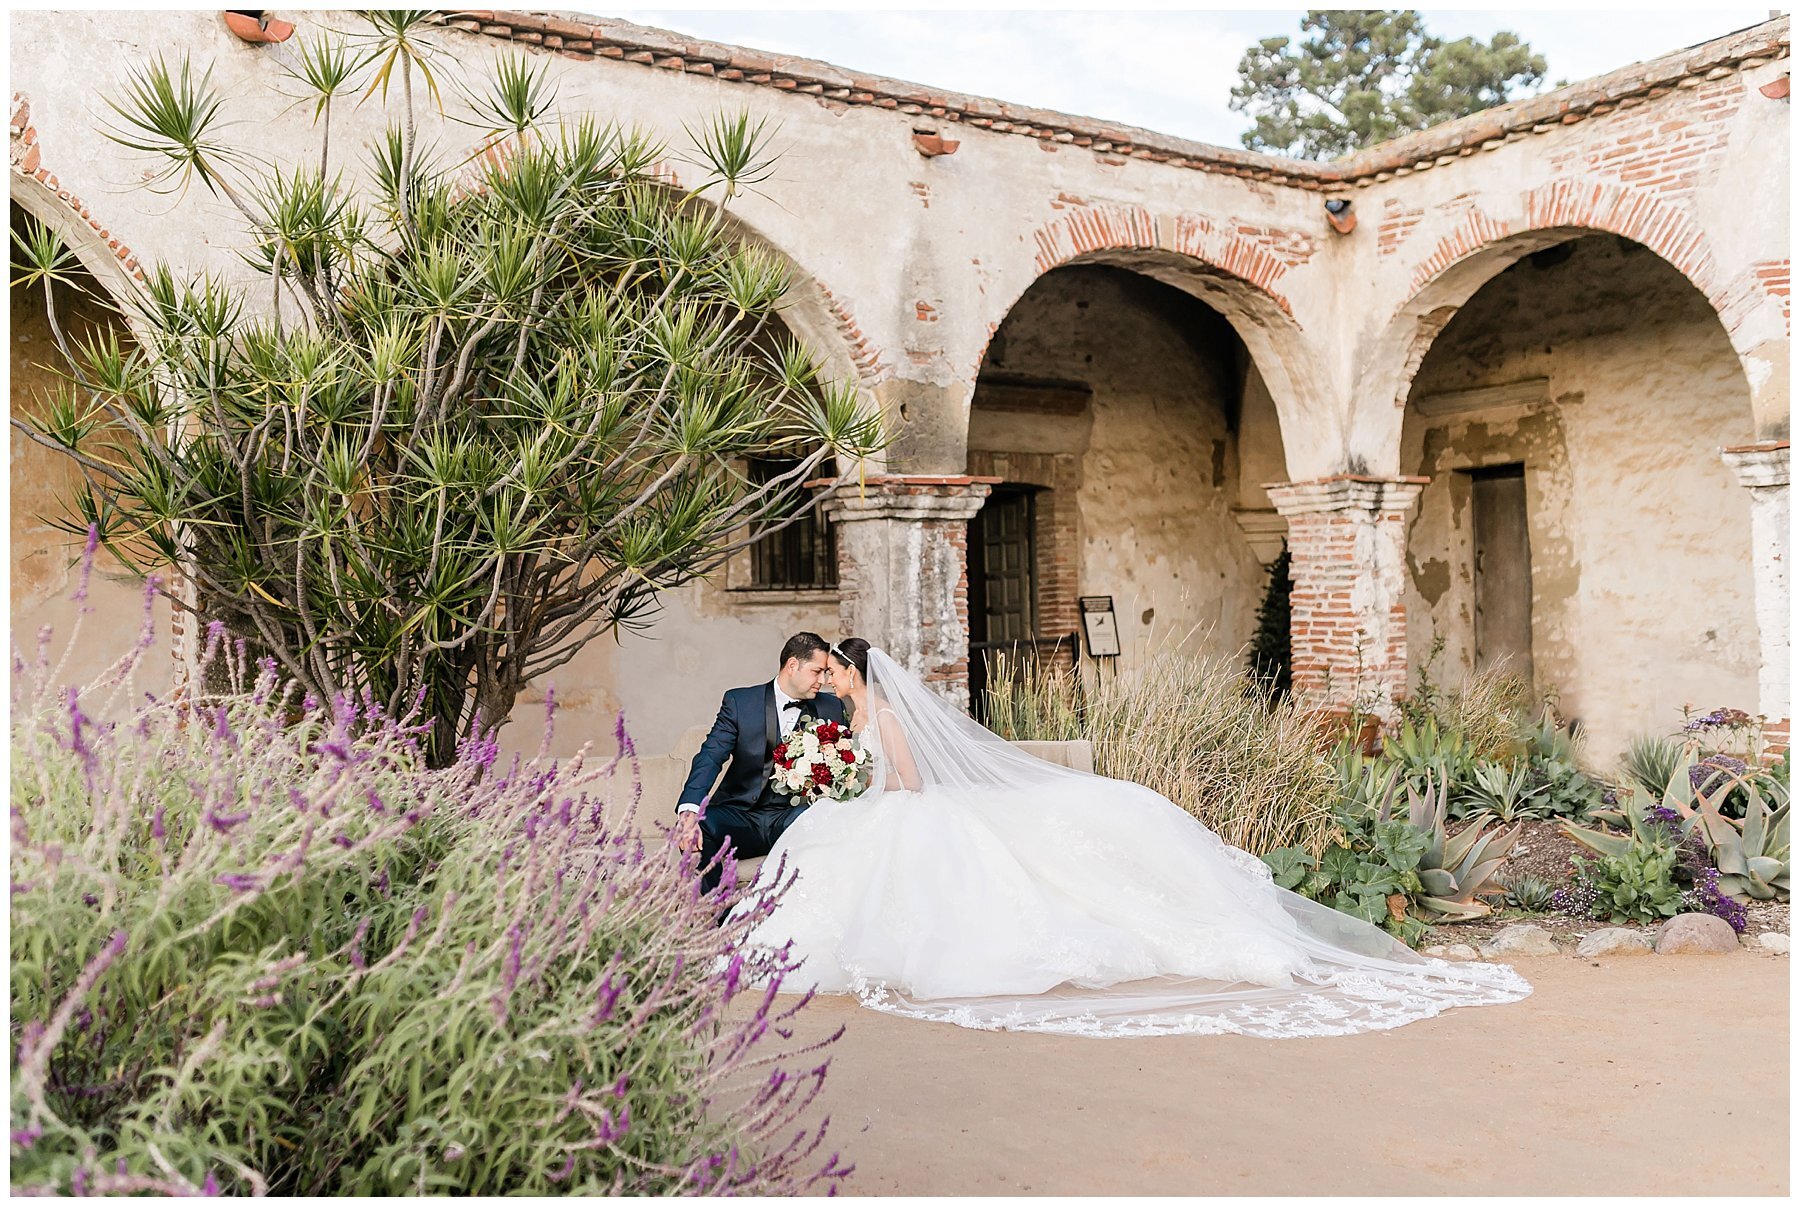  bride and groom in the courtyard with archways and greenery 